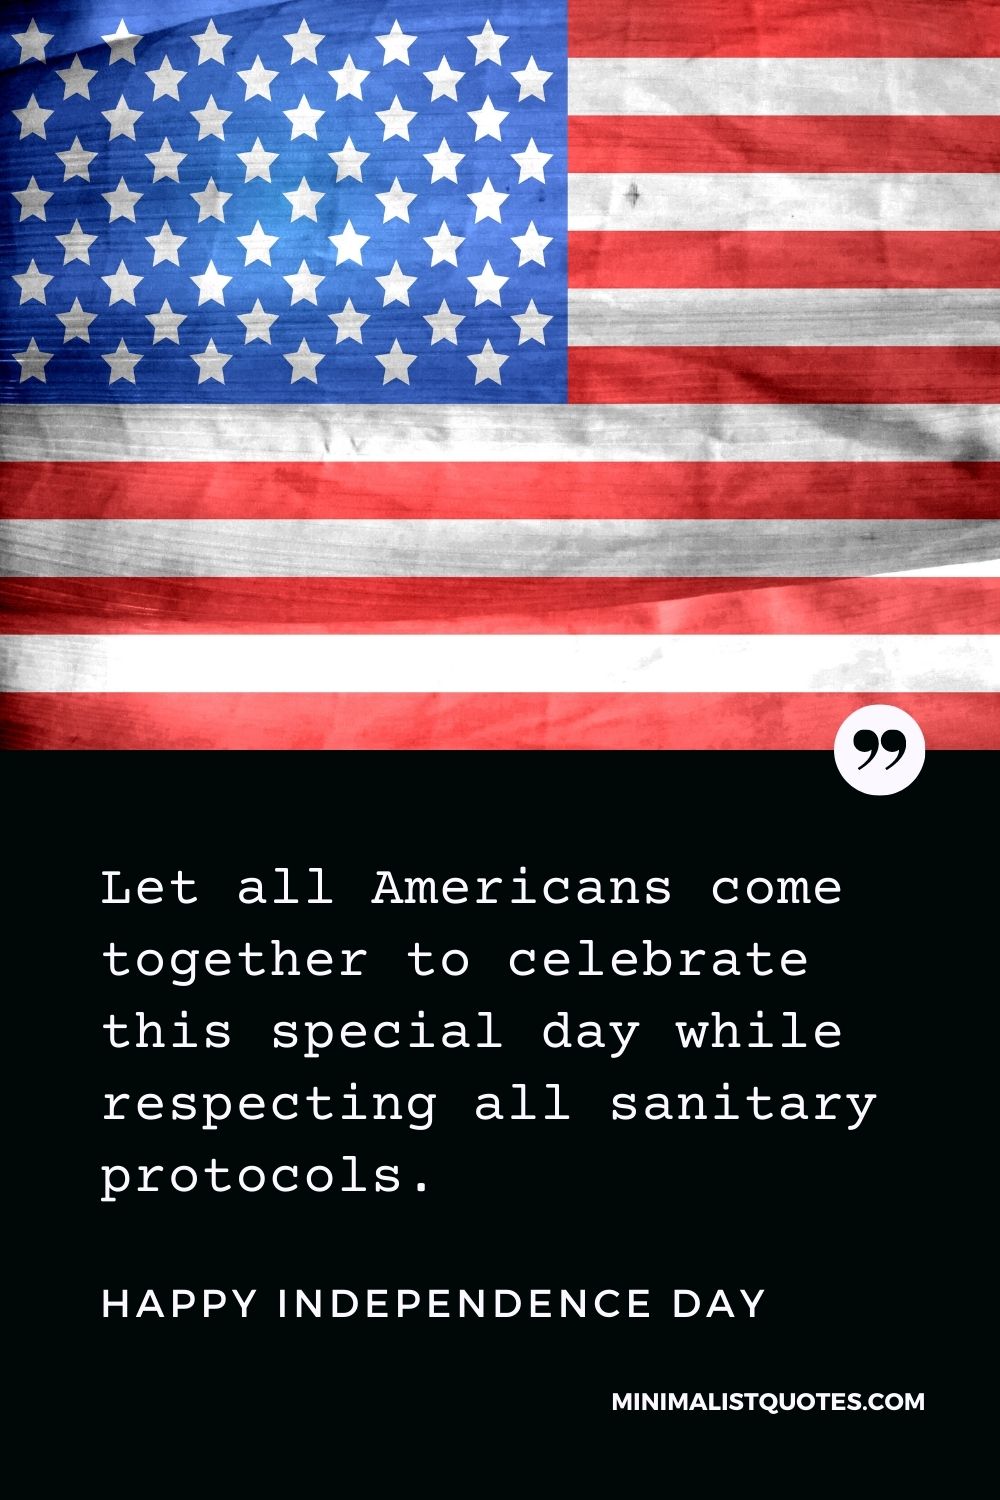 Independence Day wish, quote & message with image: Let all Americans come together to celebrate this special day while respecting all sanitary protocols. Happy Independence Day!